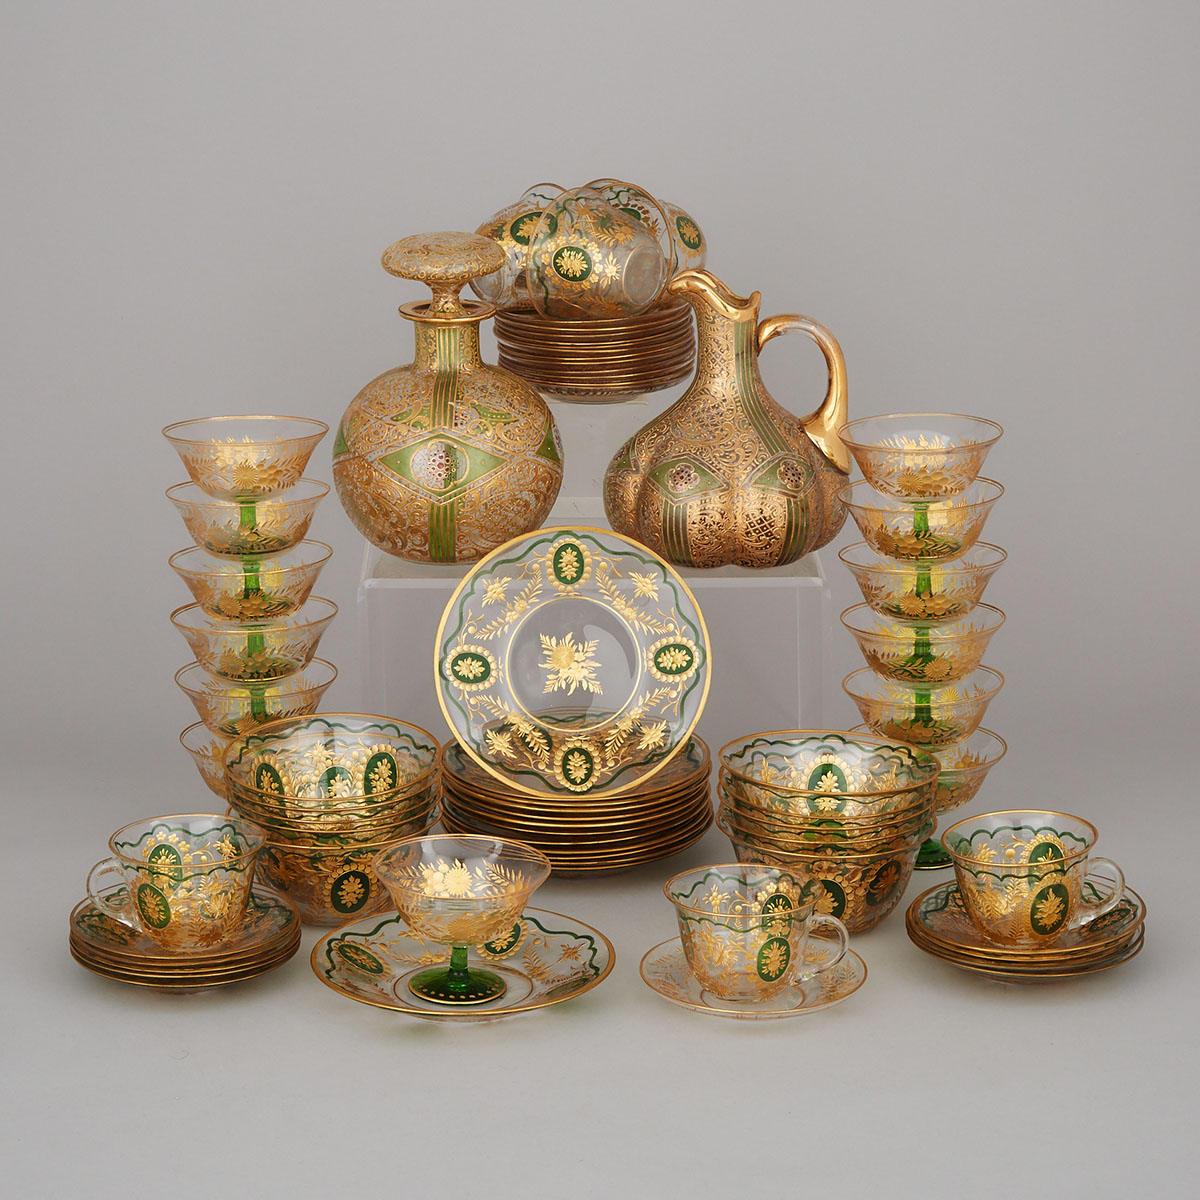 Bohemian Engraved, Green Enameled and Gilt Glass Service, early 20th century